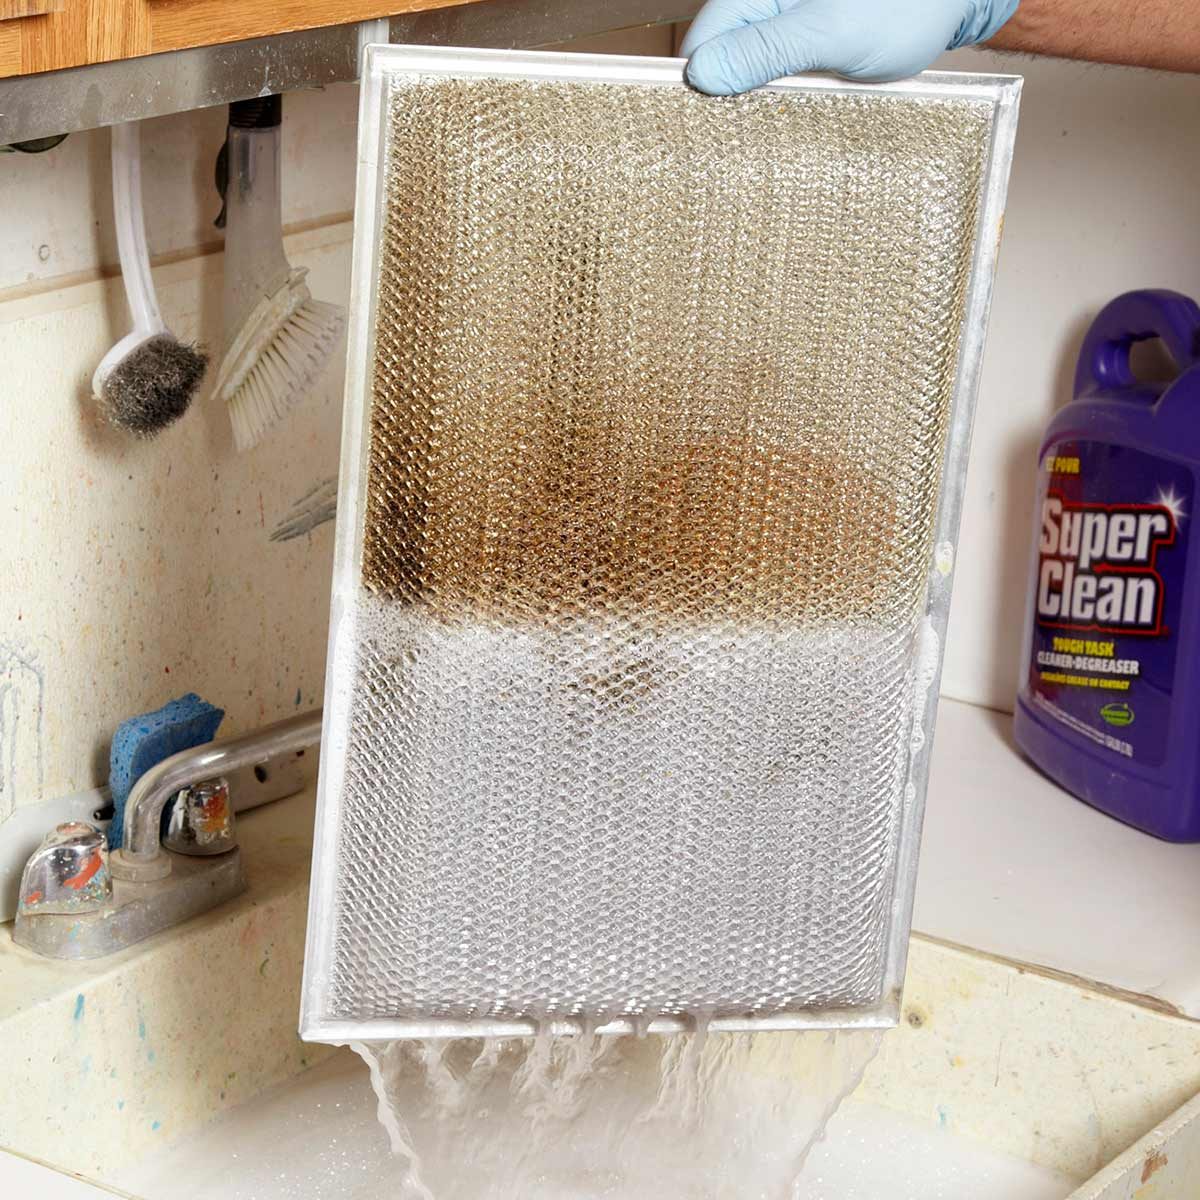 How to clean your kitchen extractor fan filter